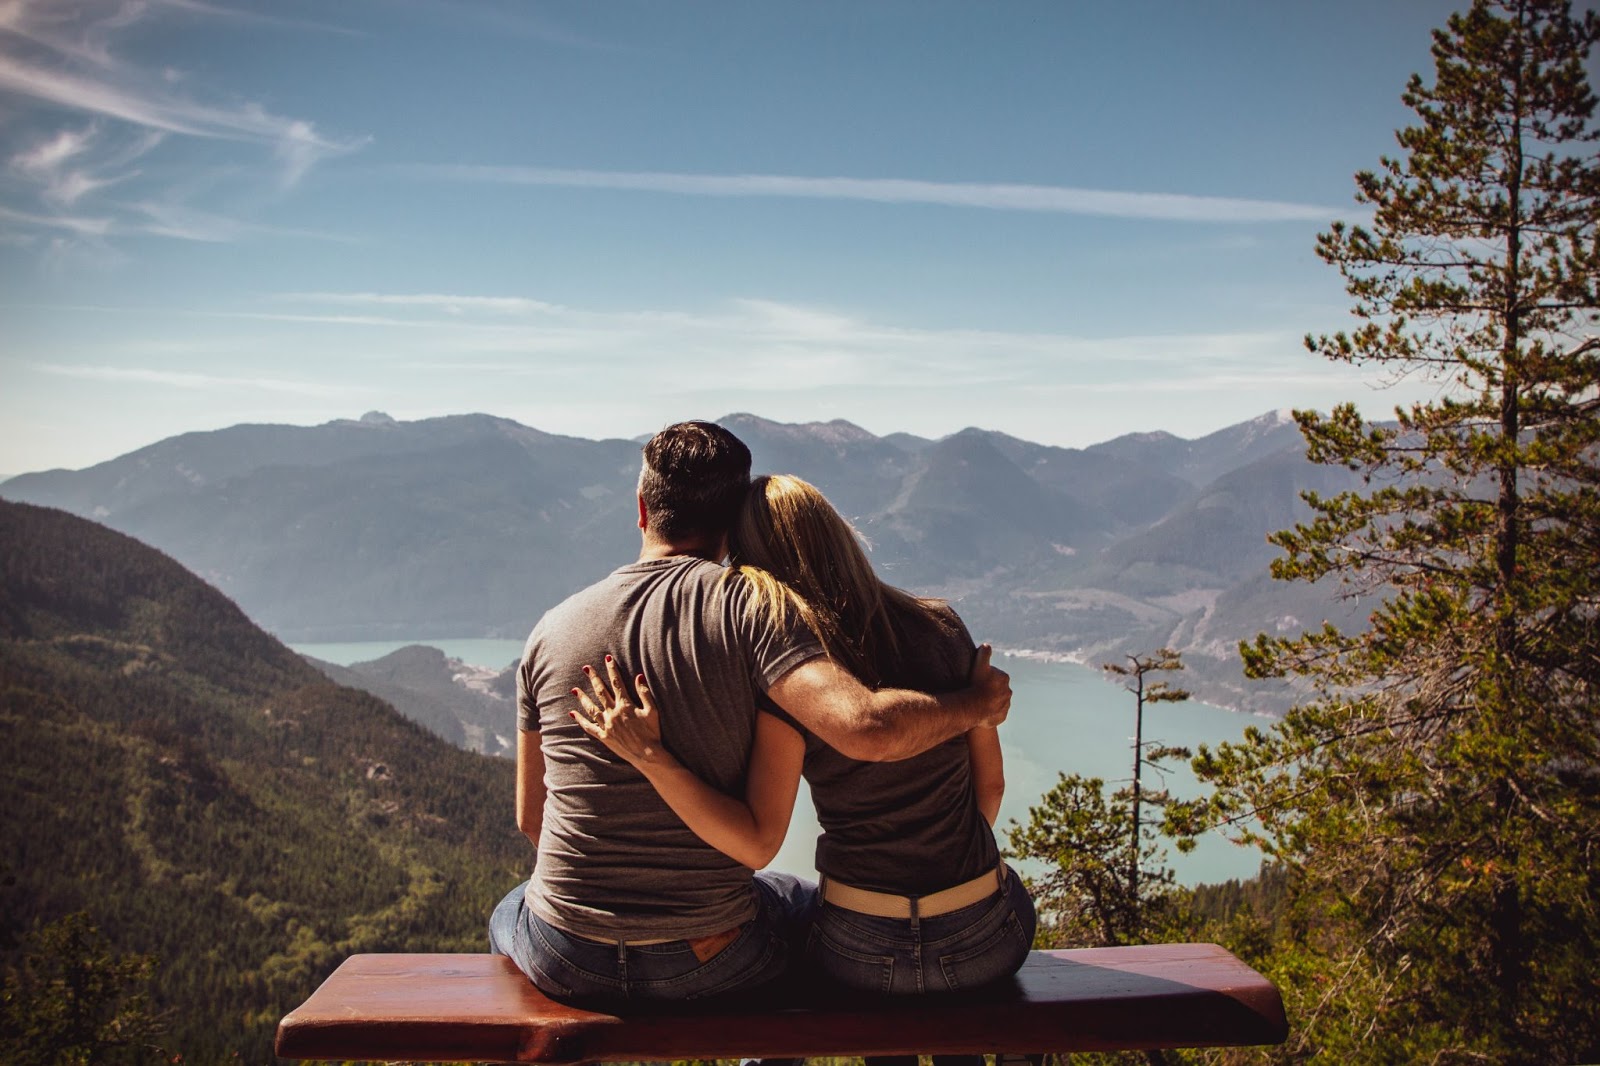 Man and Woman Sitting on Bench Viewing a Mountain Range